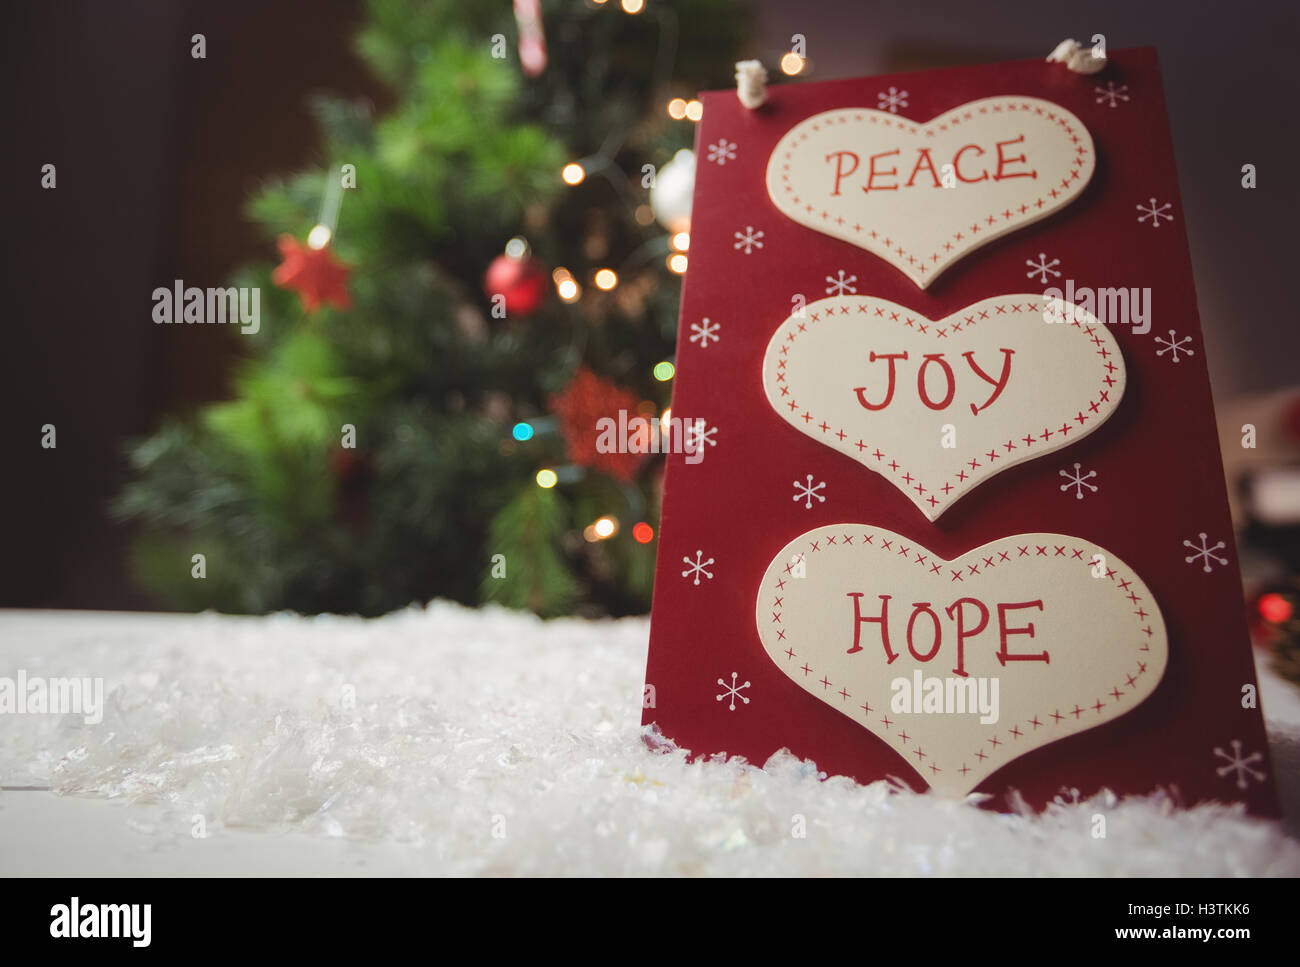 Christmas label with massages of peace, joy and hope Stock Photo